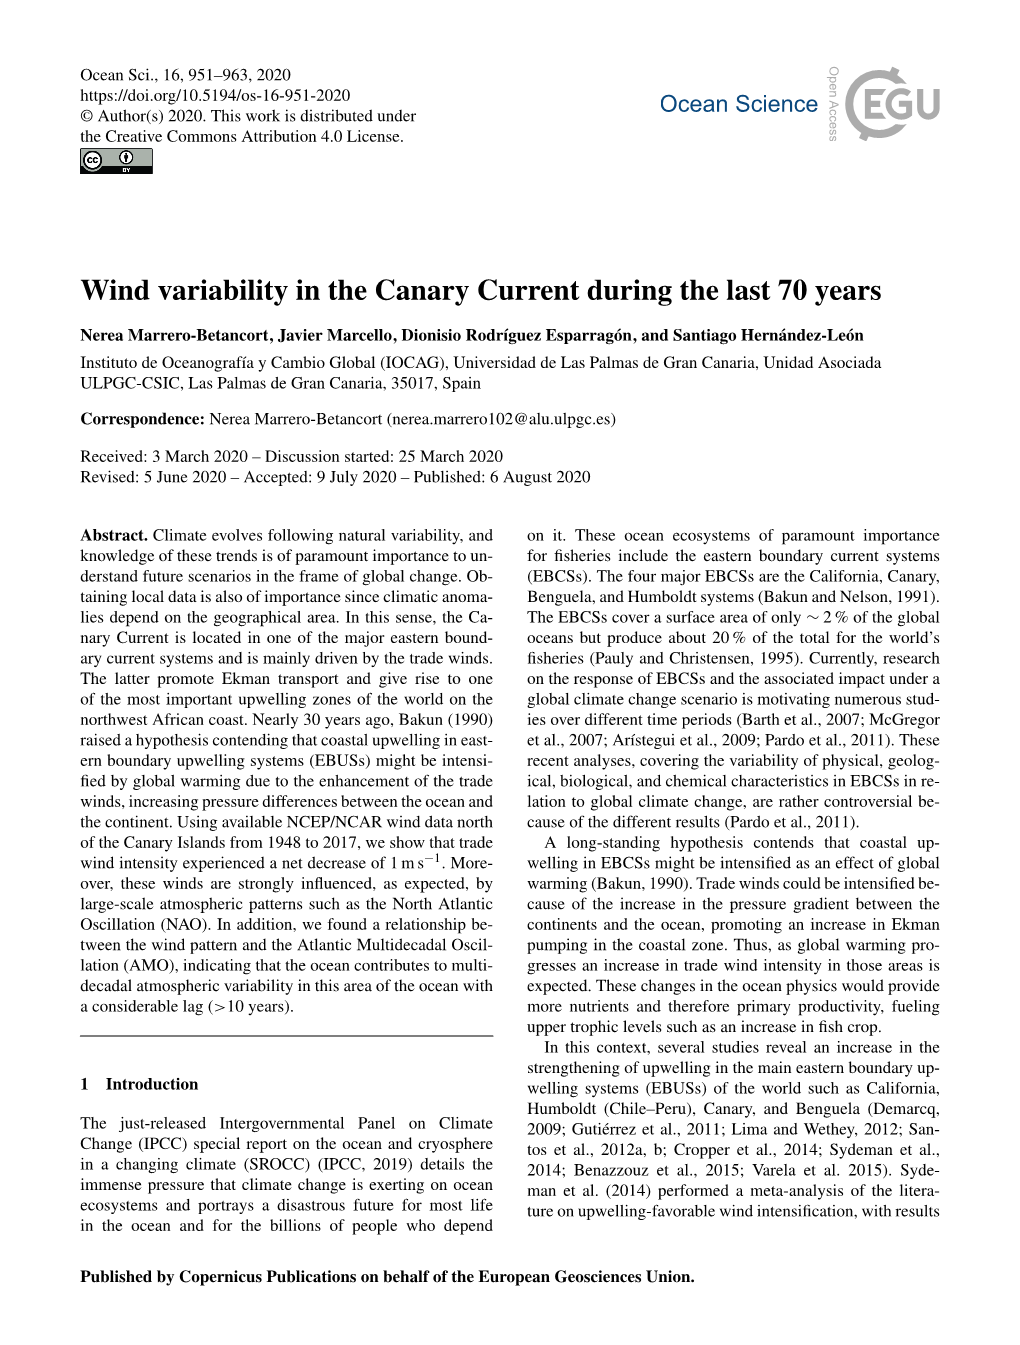 Wind Variability in the Canary Current During the Last 70 Years